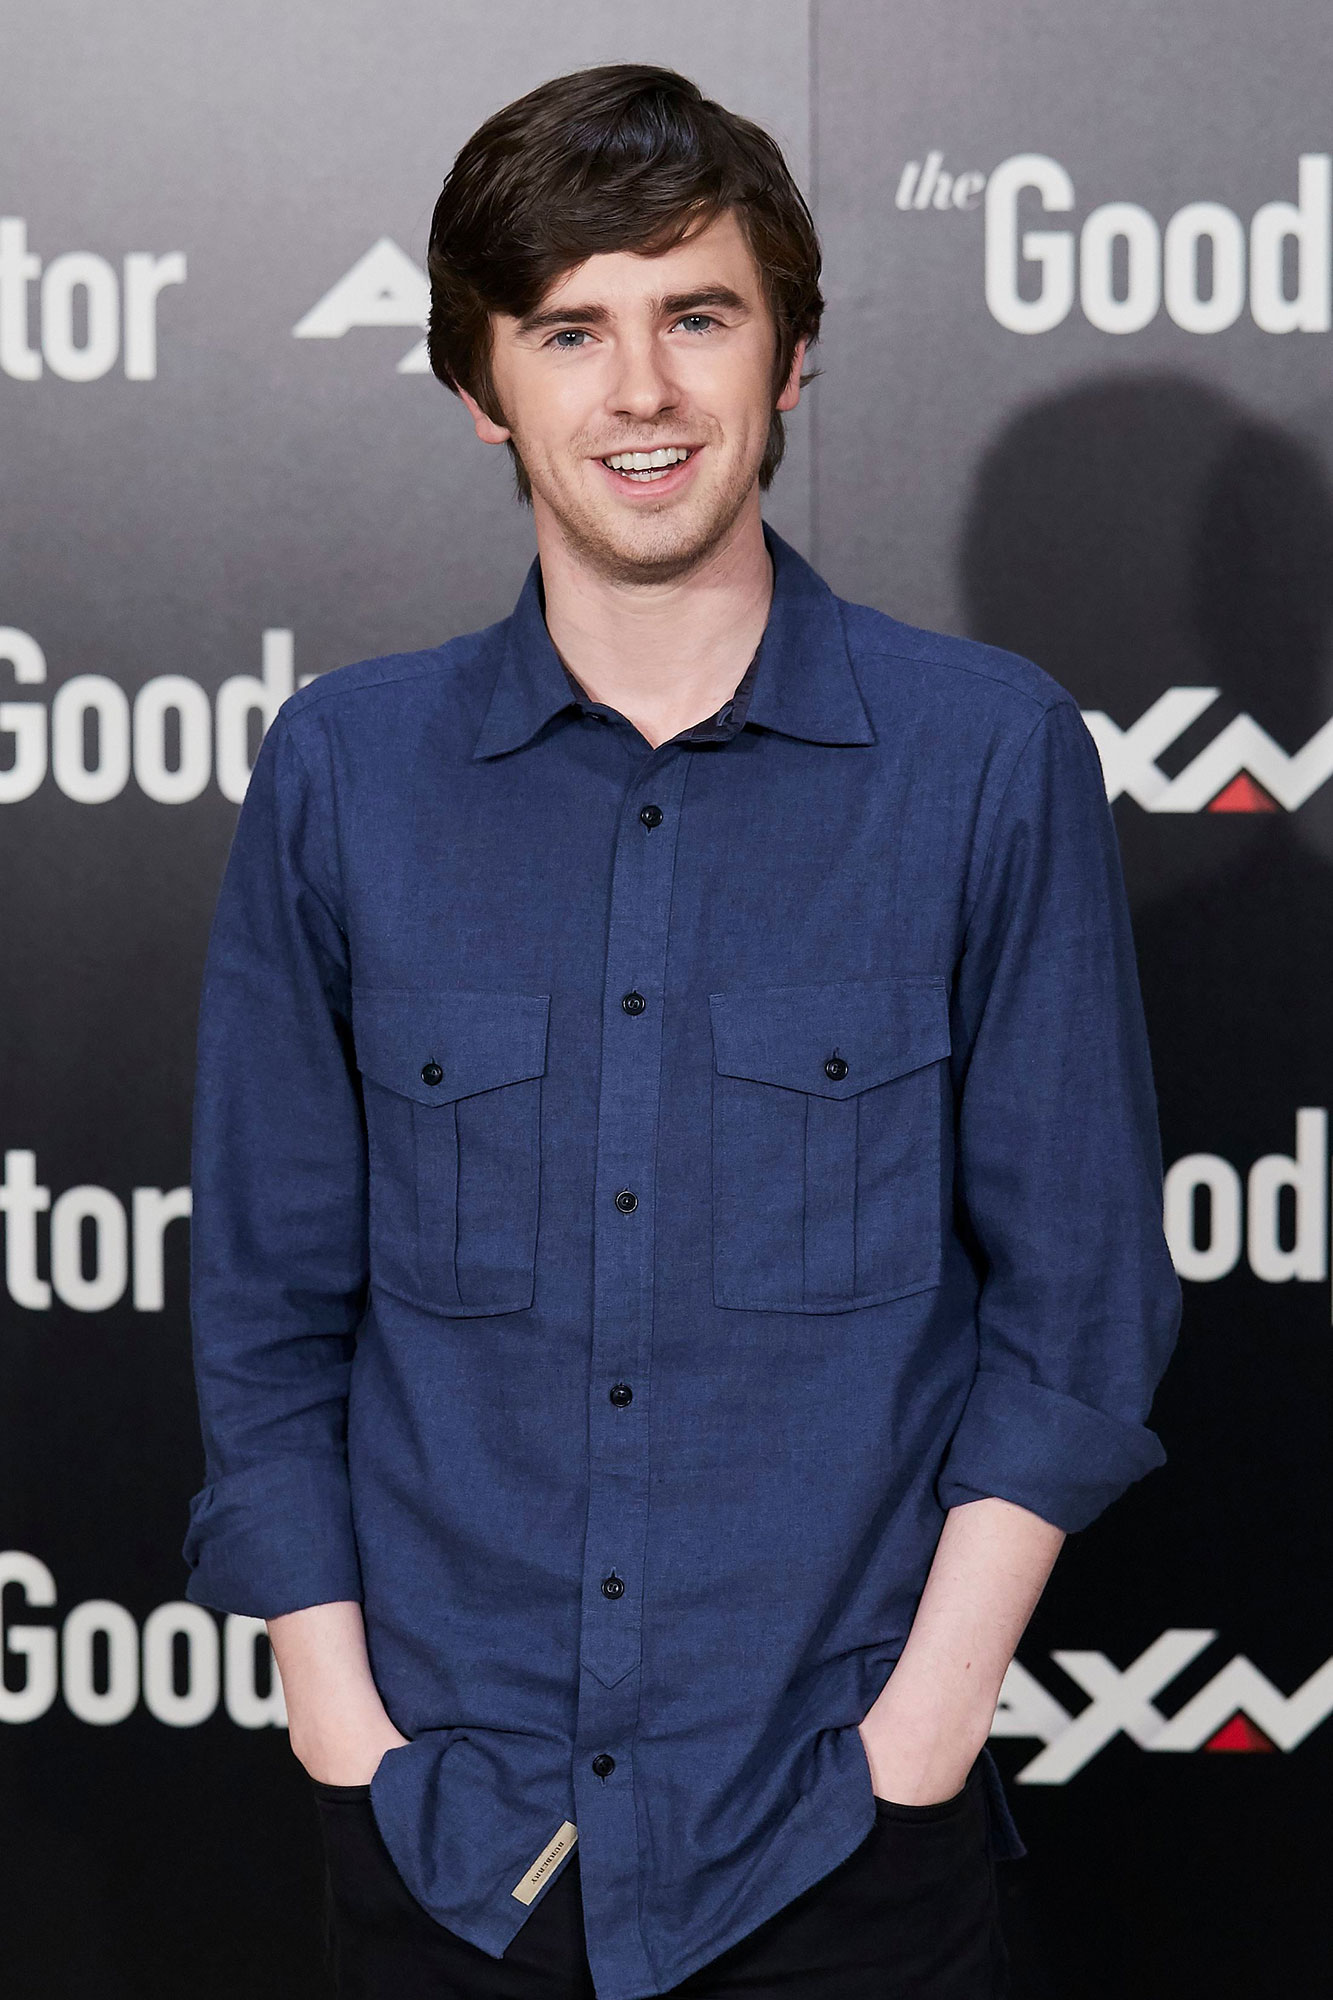 Freddie Highmores Dating History Before Getting Married